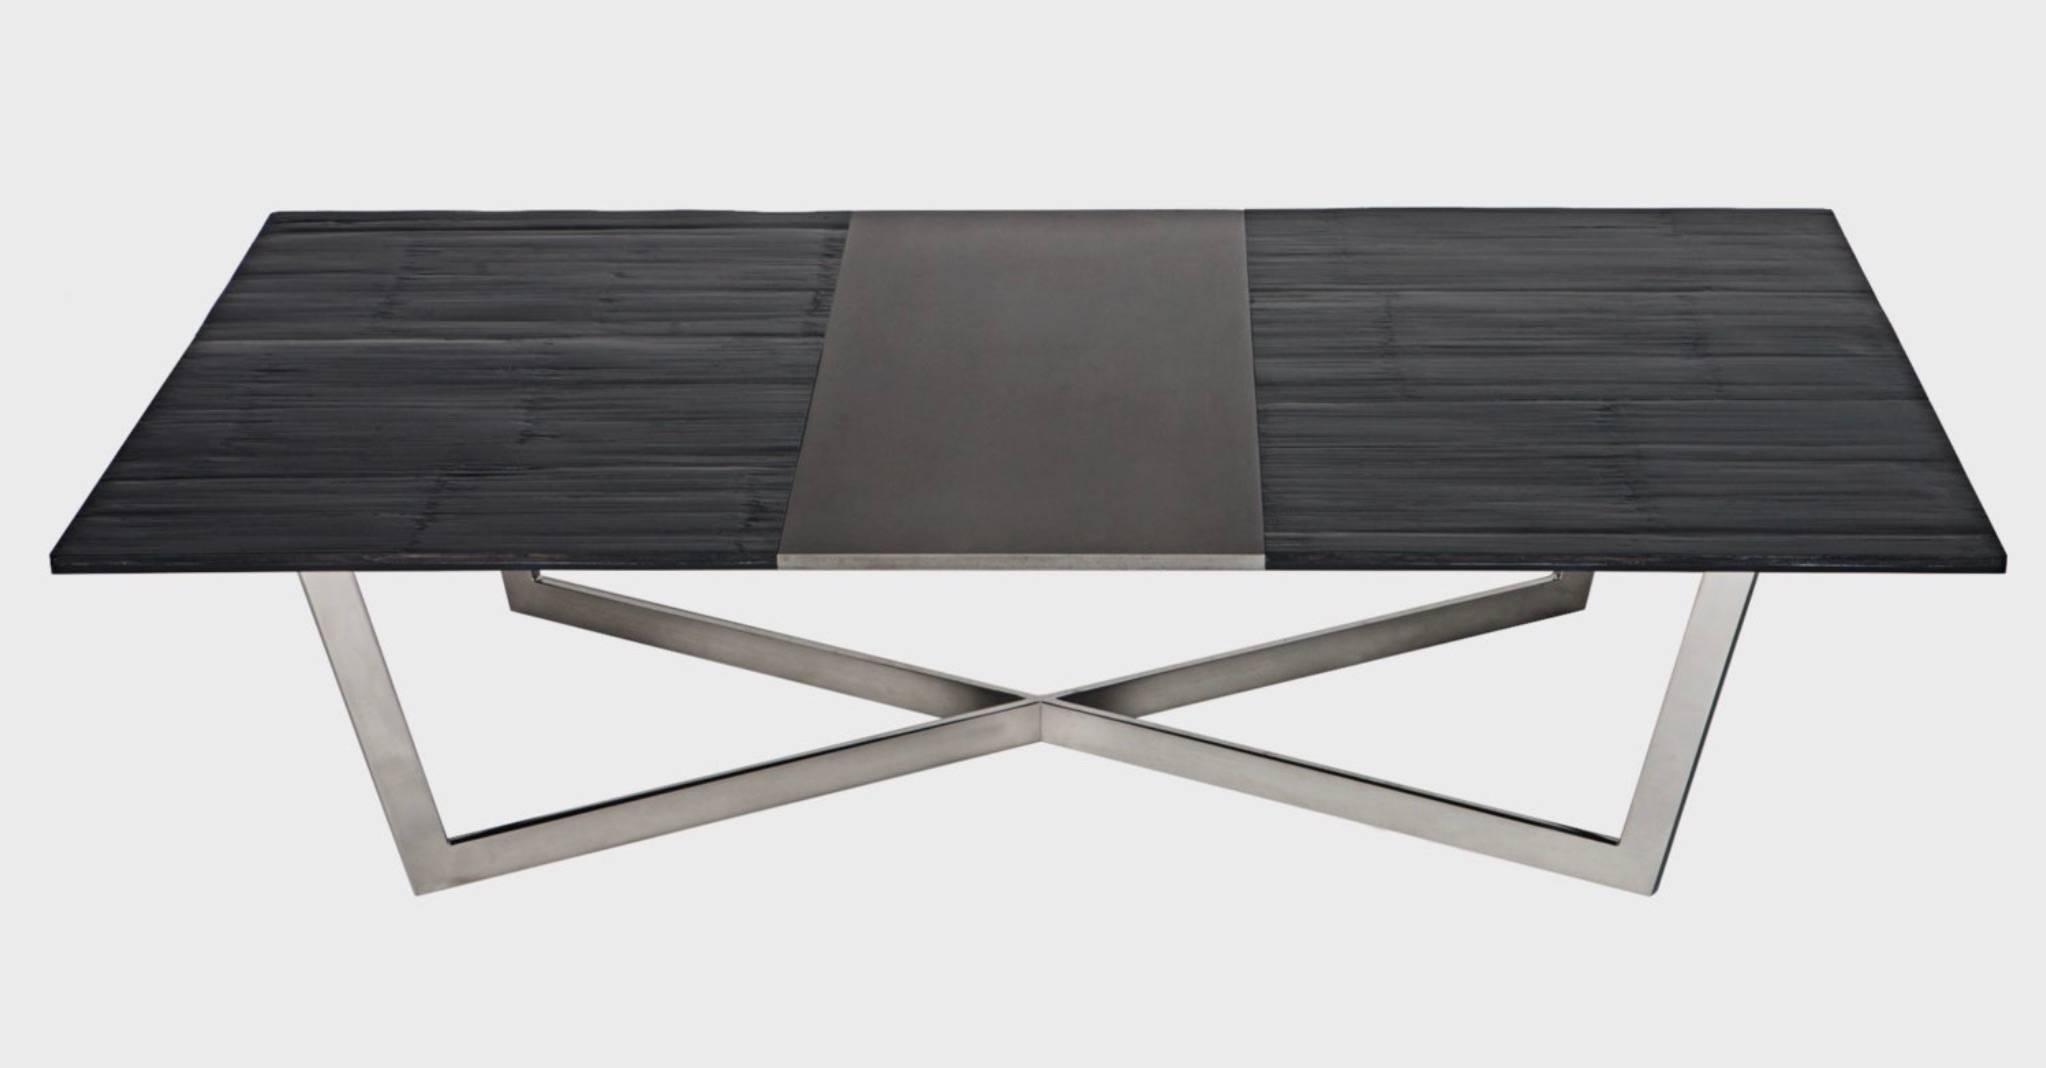 An eye-catching runner of blackened steel spans the length of this handcrafted table’s ¼-inch thick bamboo top. Its matte finish is juxtaposed against the polished luster of an X-shaped base and provides appealing contrast that plays well in